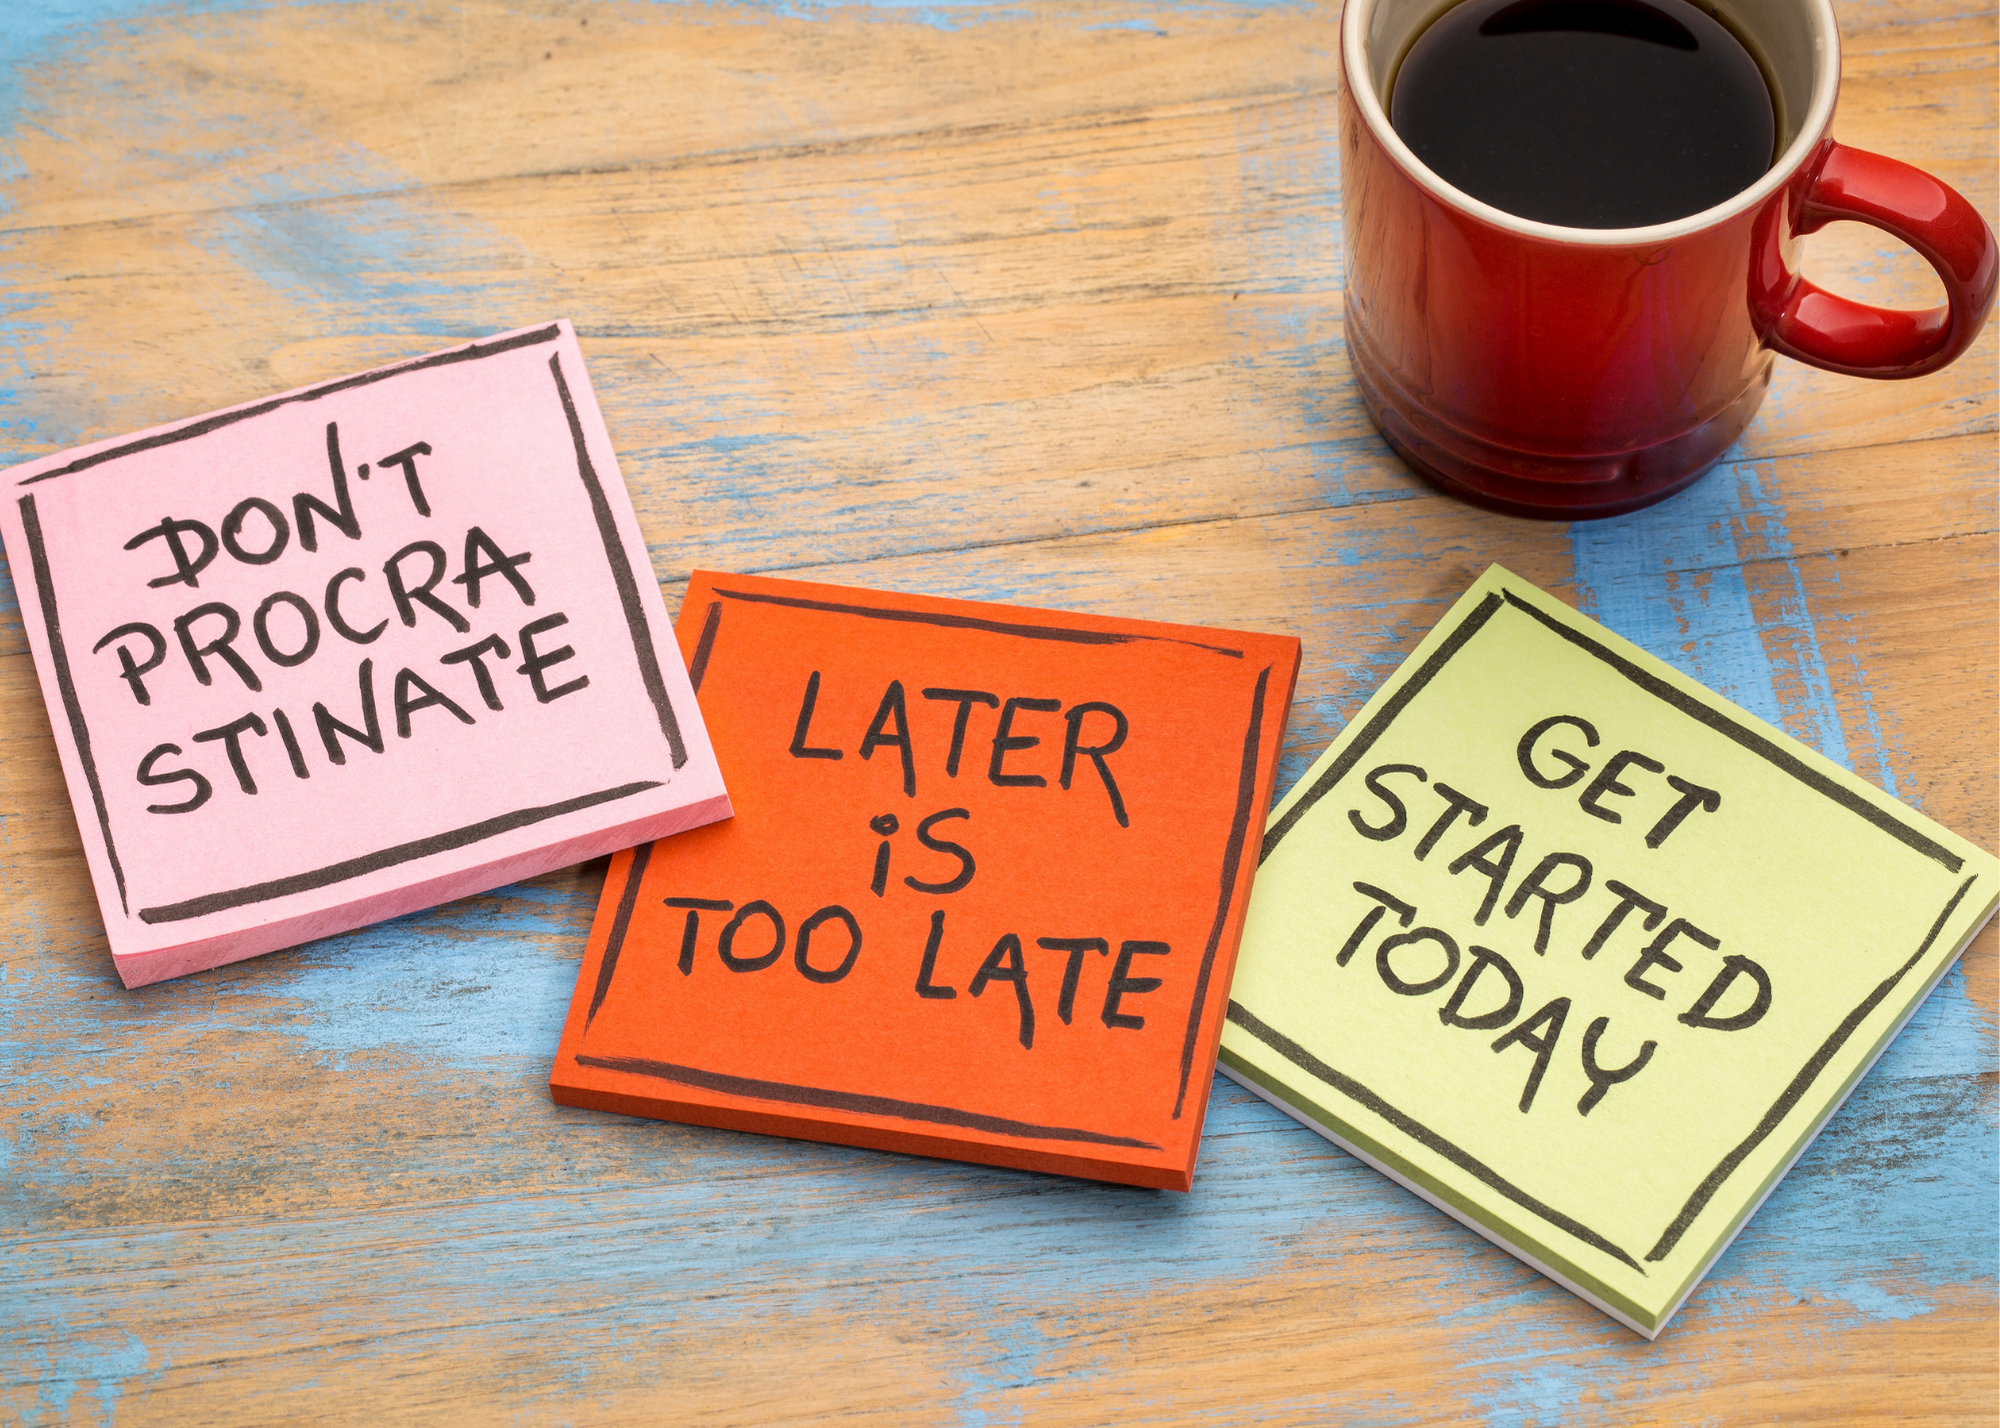 coffee mug surrounded by sticky notes that say "Don't Procrastinate", "Later is too late" and "Get started today"